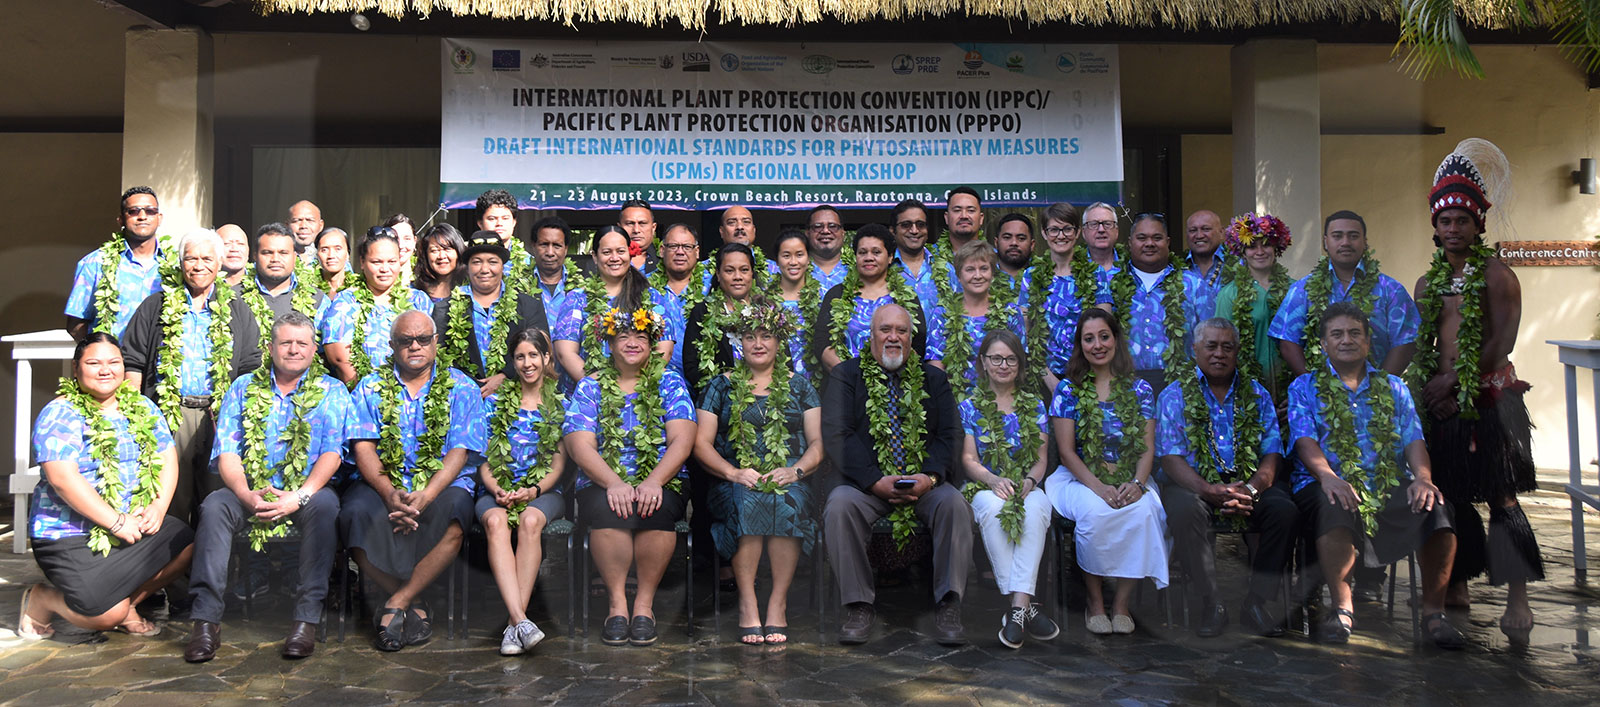 Pacific Island countries meet in Rarotonga to discuss biosecurity and trade